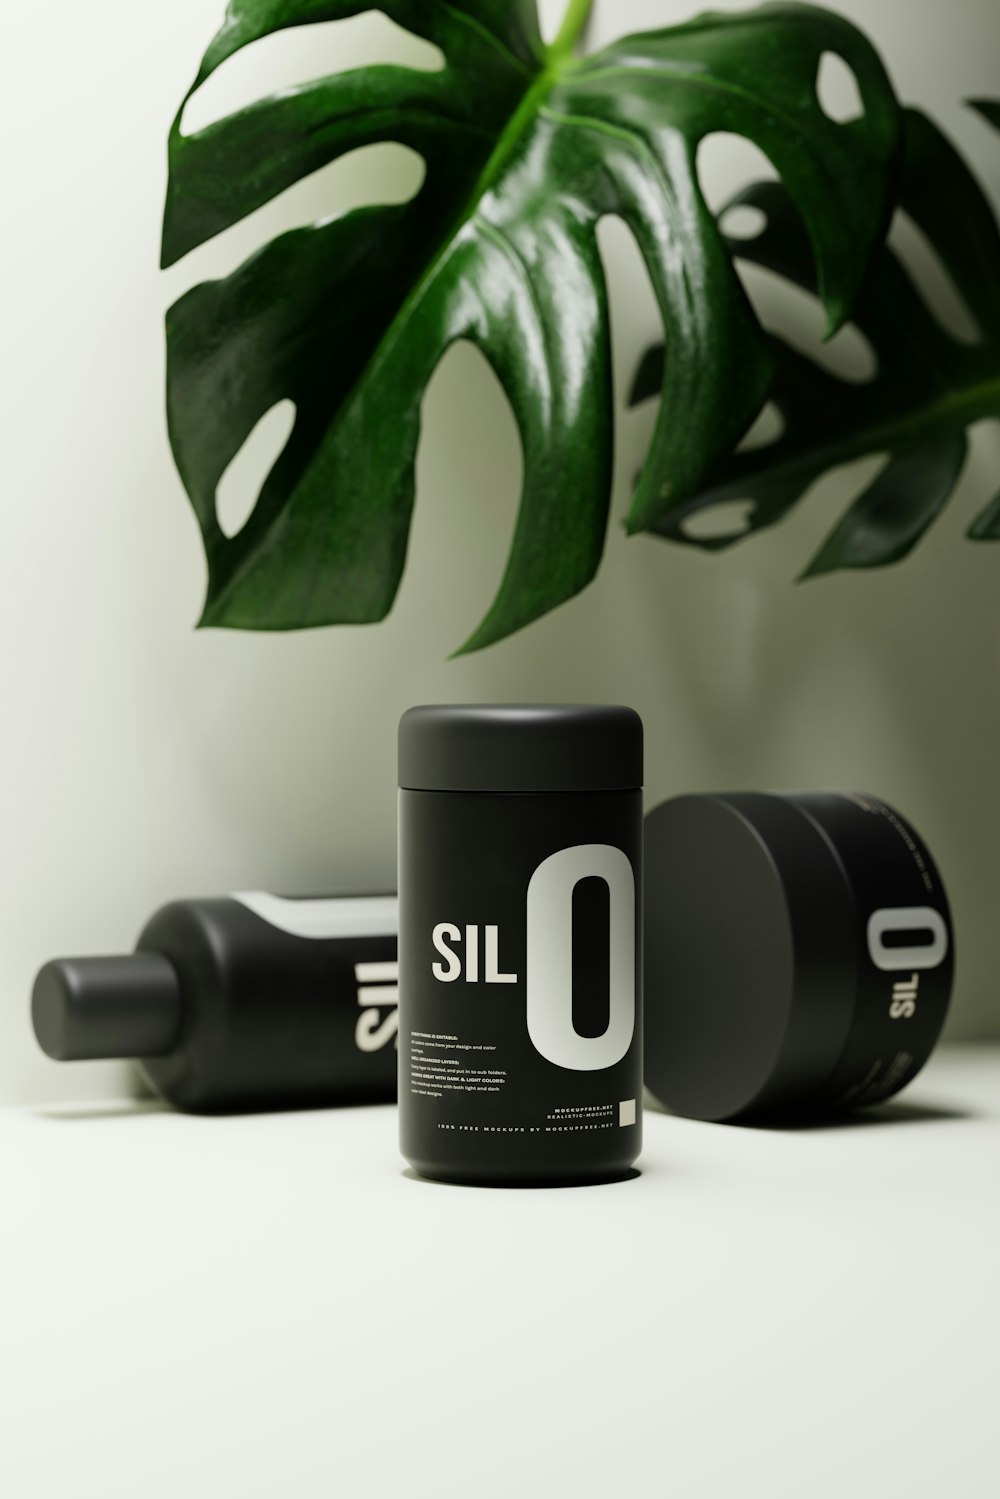 a bottle of sil 0 is next to a can of sil 0